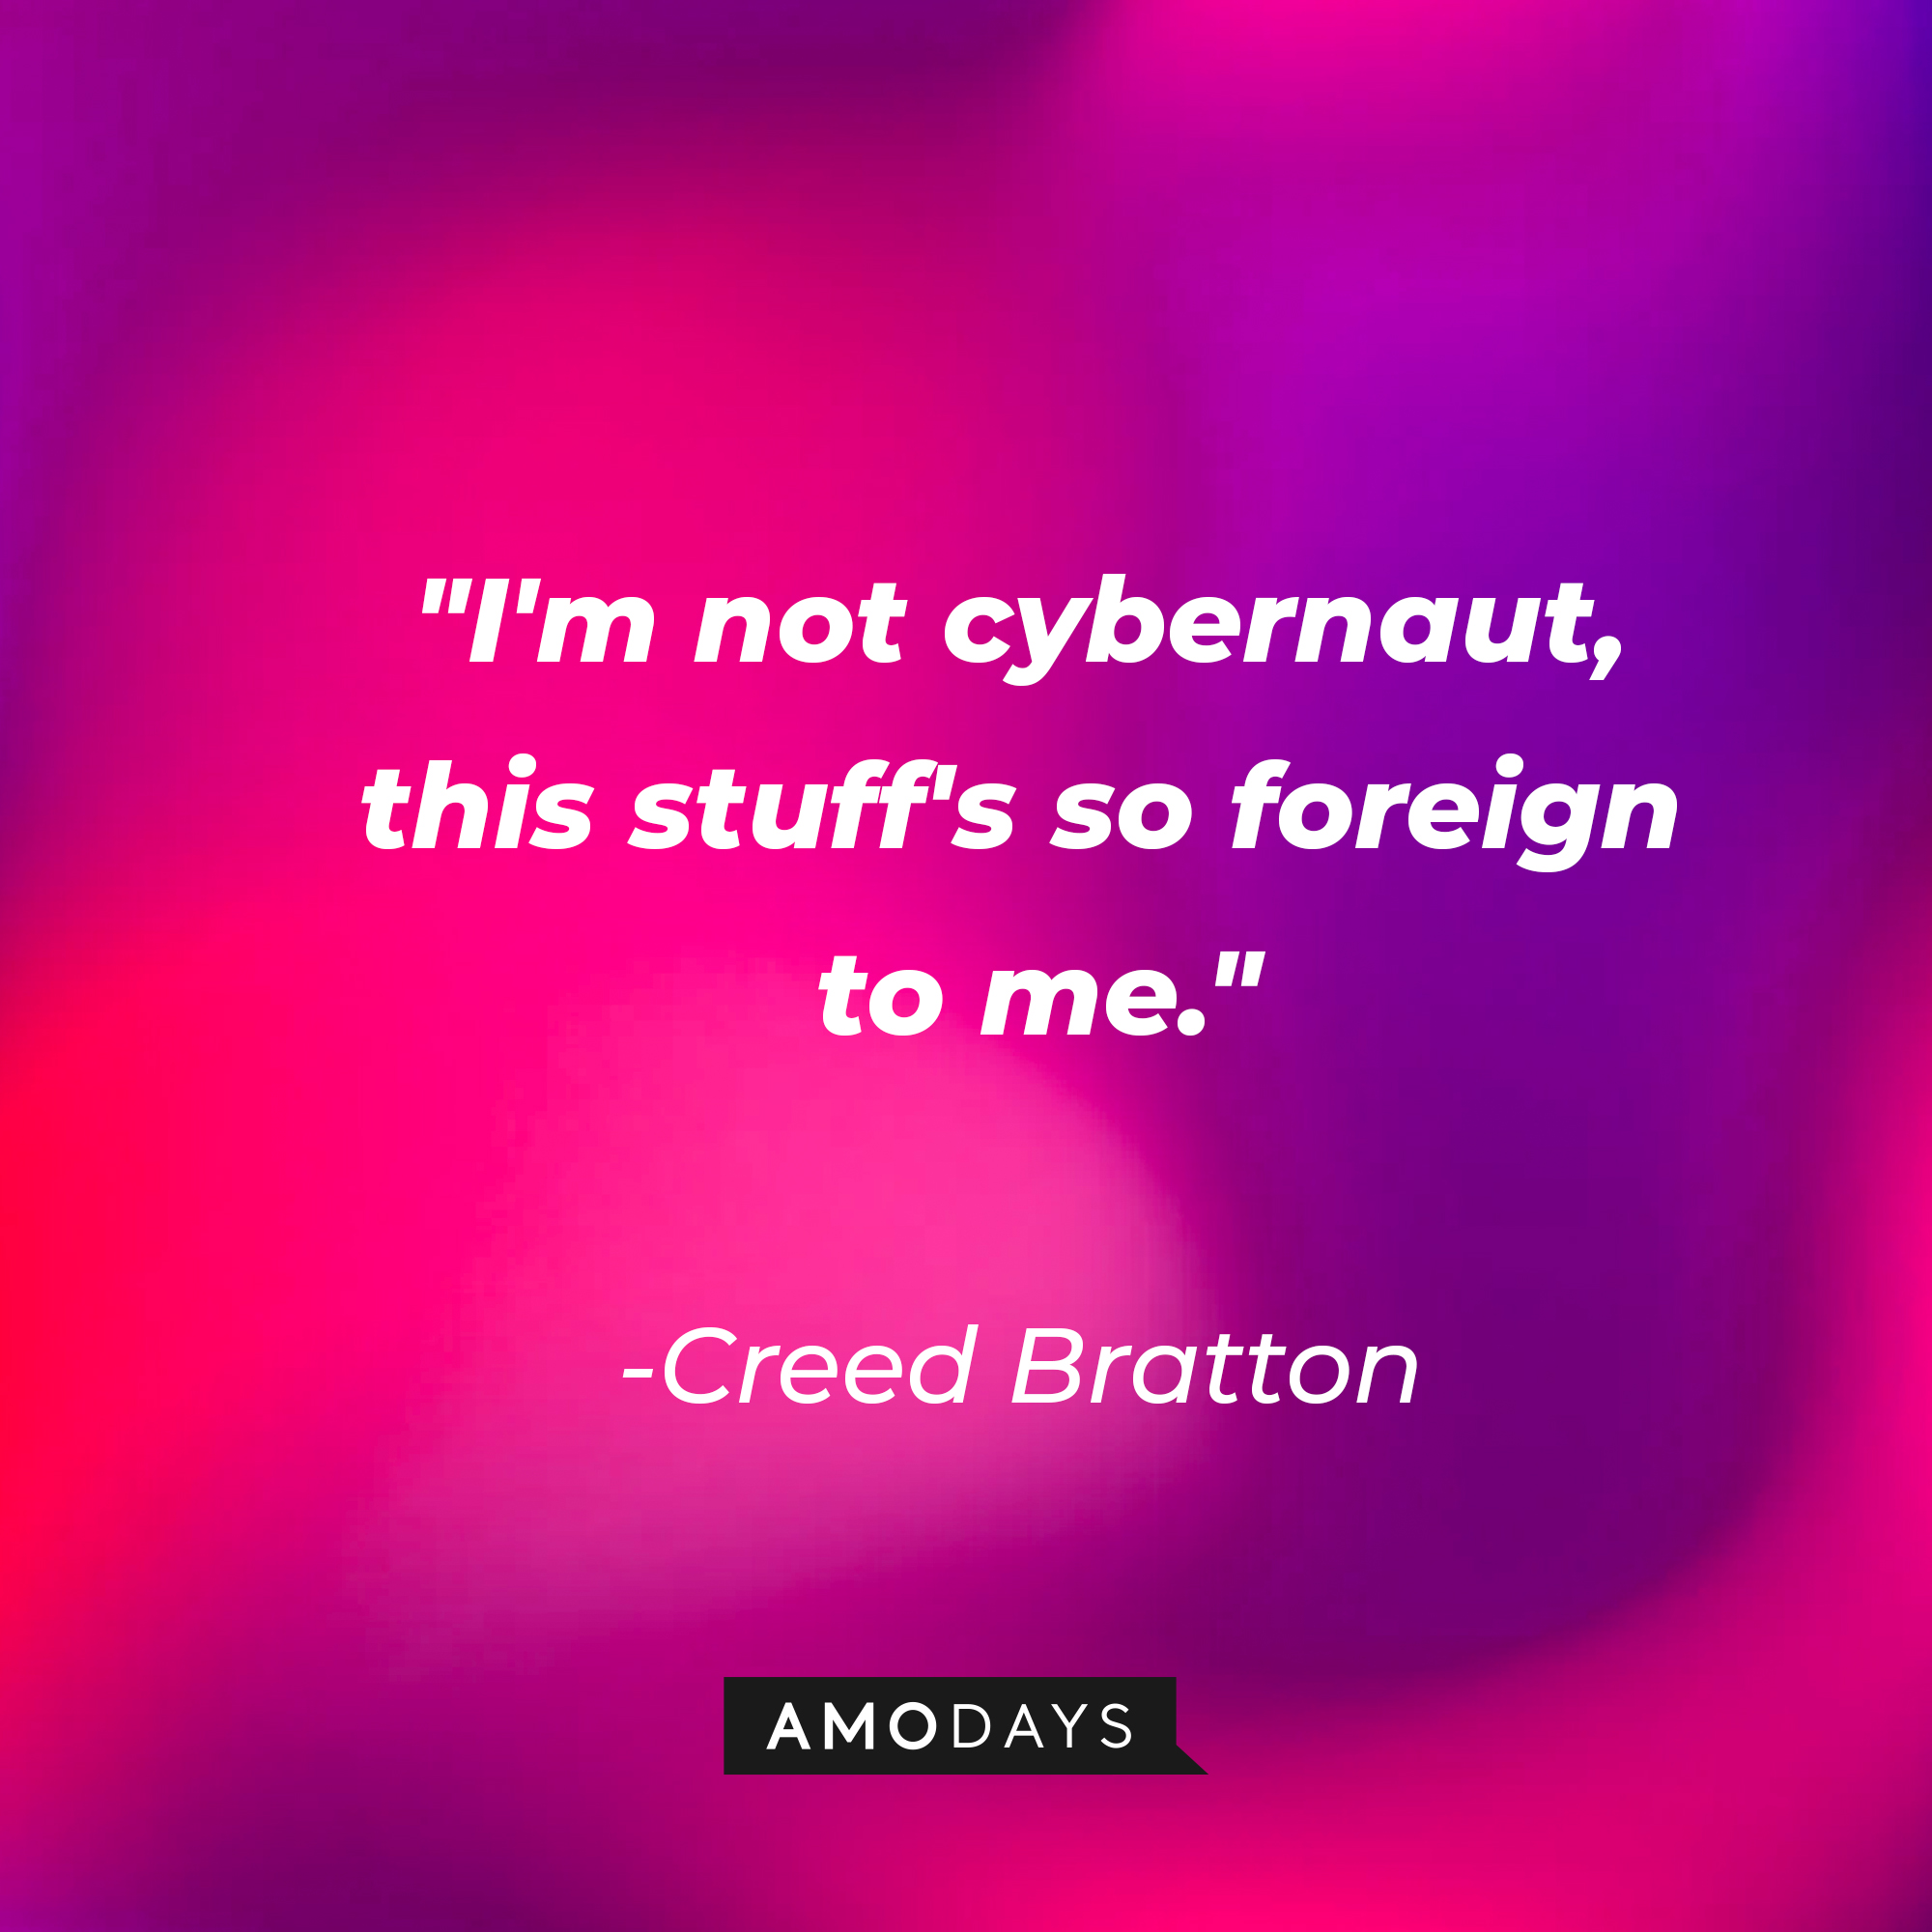 Creed Bratton's quote: "I'm not cybernaut, this stuff's so foreign to me." | Source: AmoDays